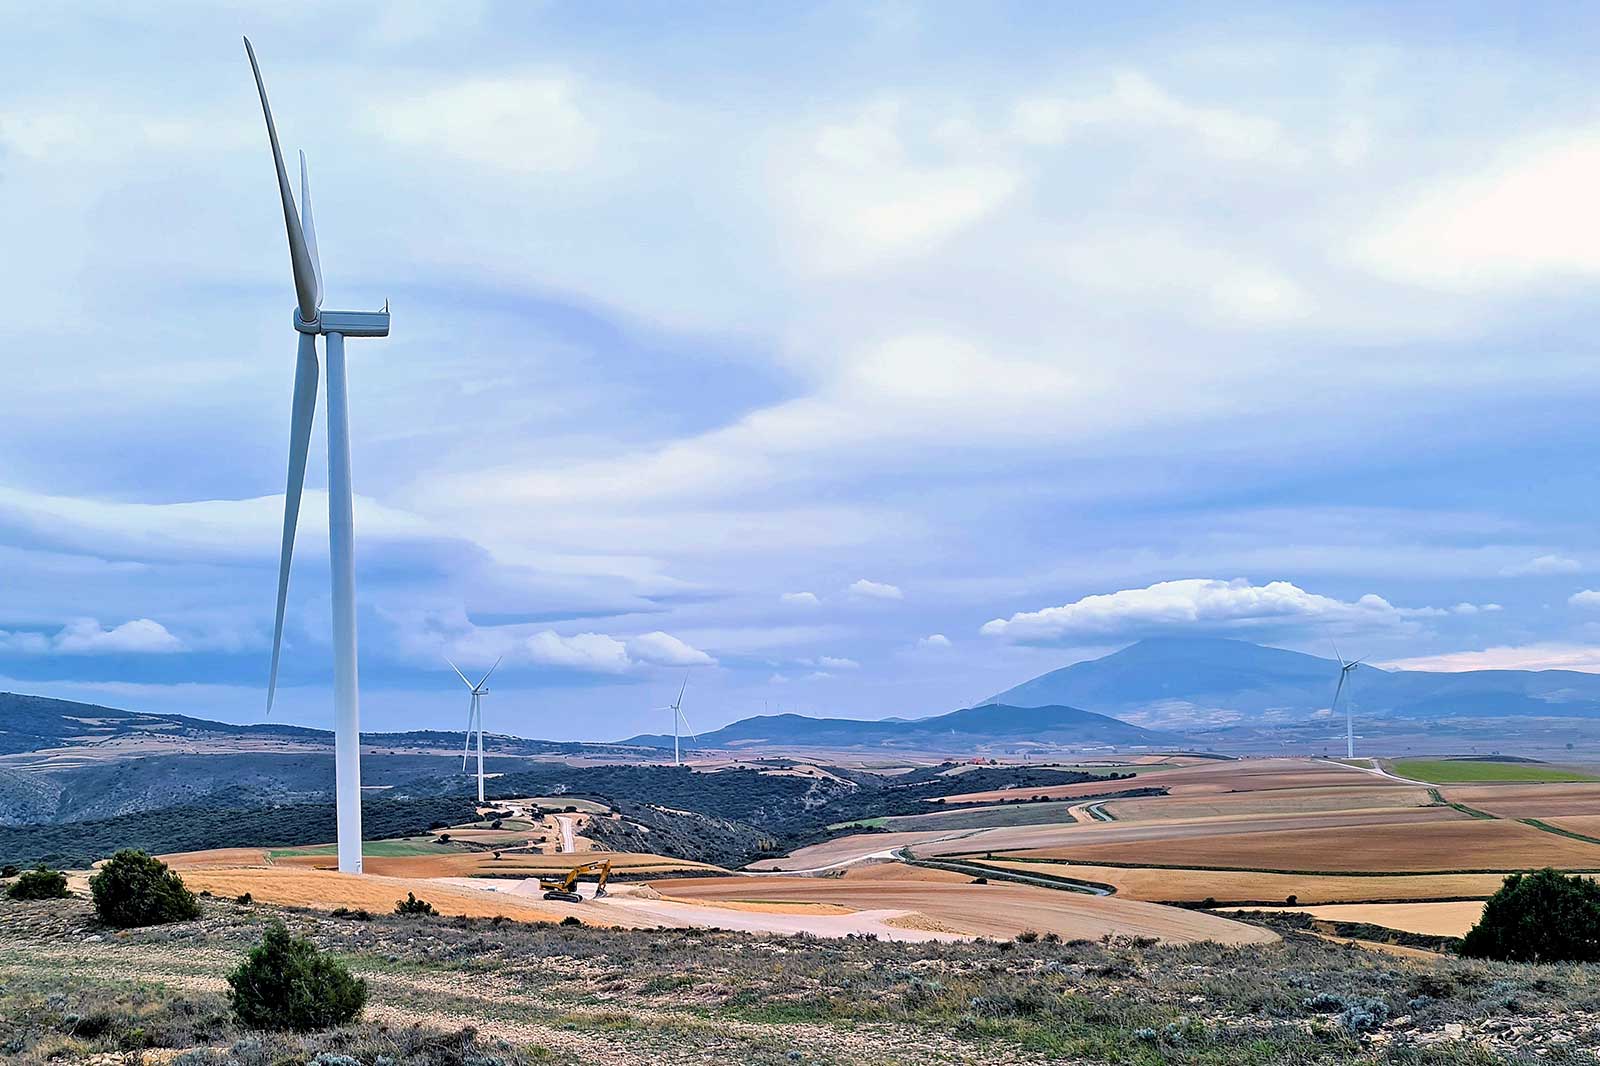 Green growth in Spain: RWE commissions Rea Unificado wind farm with innovative foundations